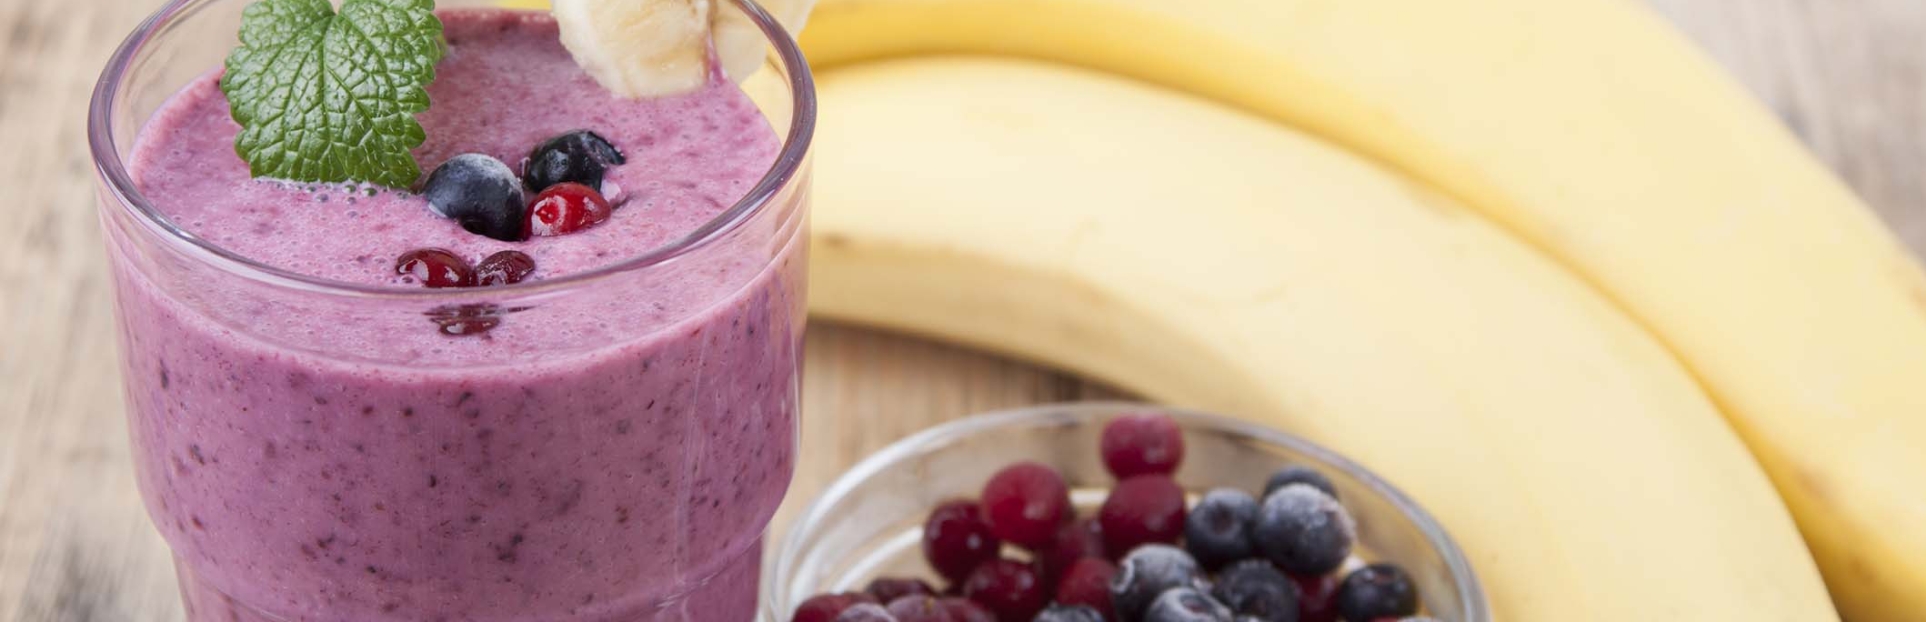 an image of a smoothie with bananas and berries